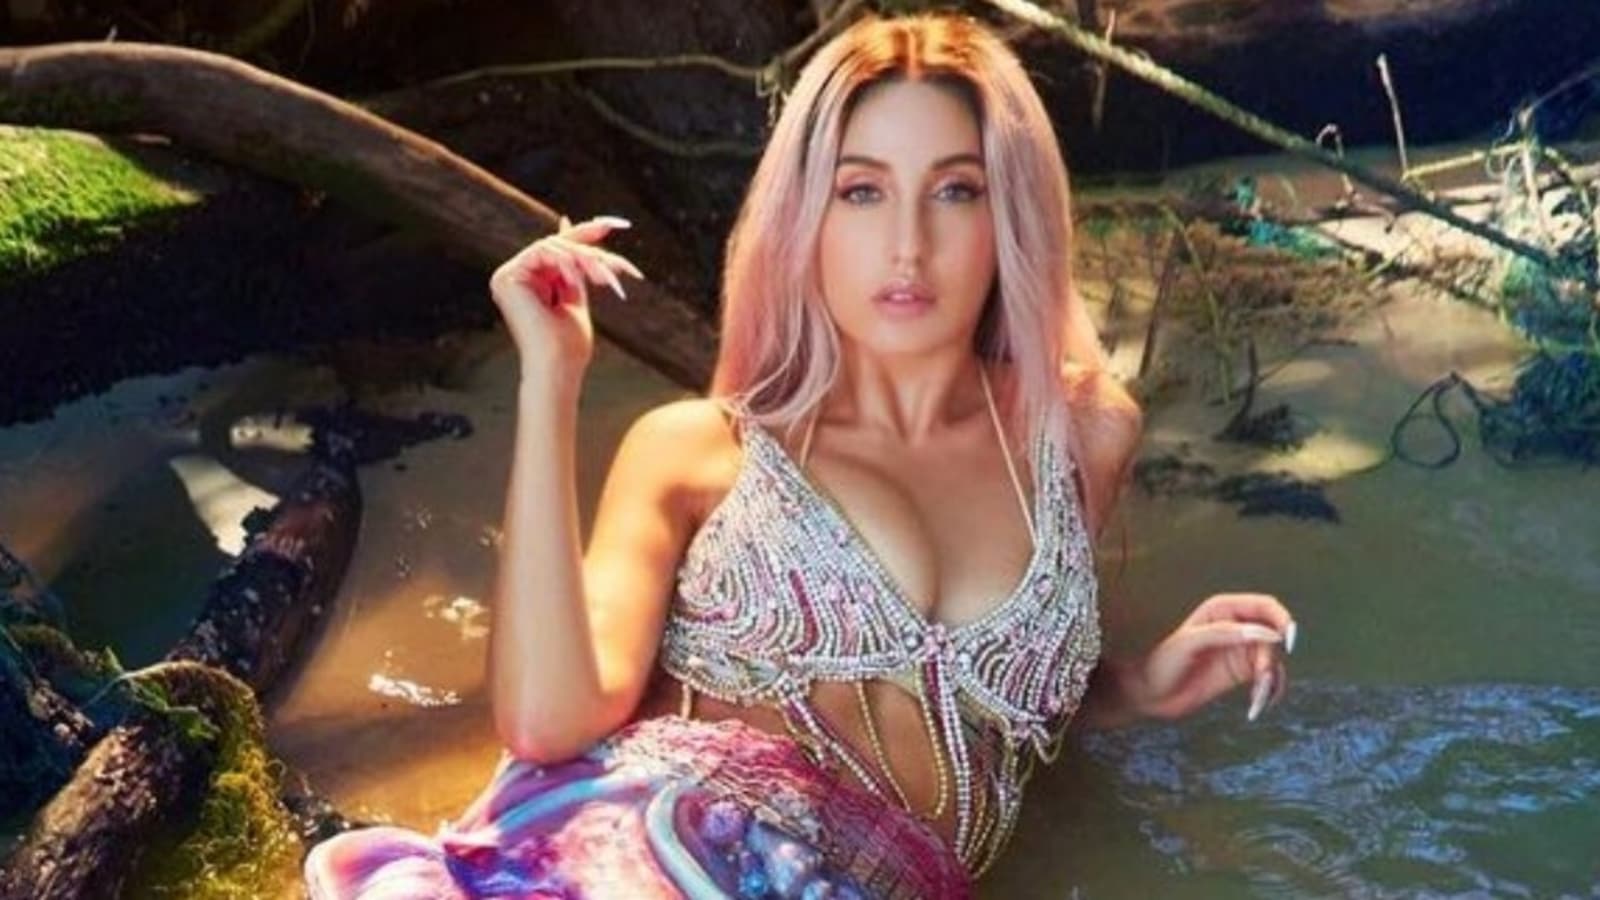 Nora Fatehi Hot Xx Video With Cum - Nora Fatehi is a mermaid with blonde pink hair for sexy photoshoot, don't  miss Nargis Fakhri's comment | Fashion Trends - Hindustan Times